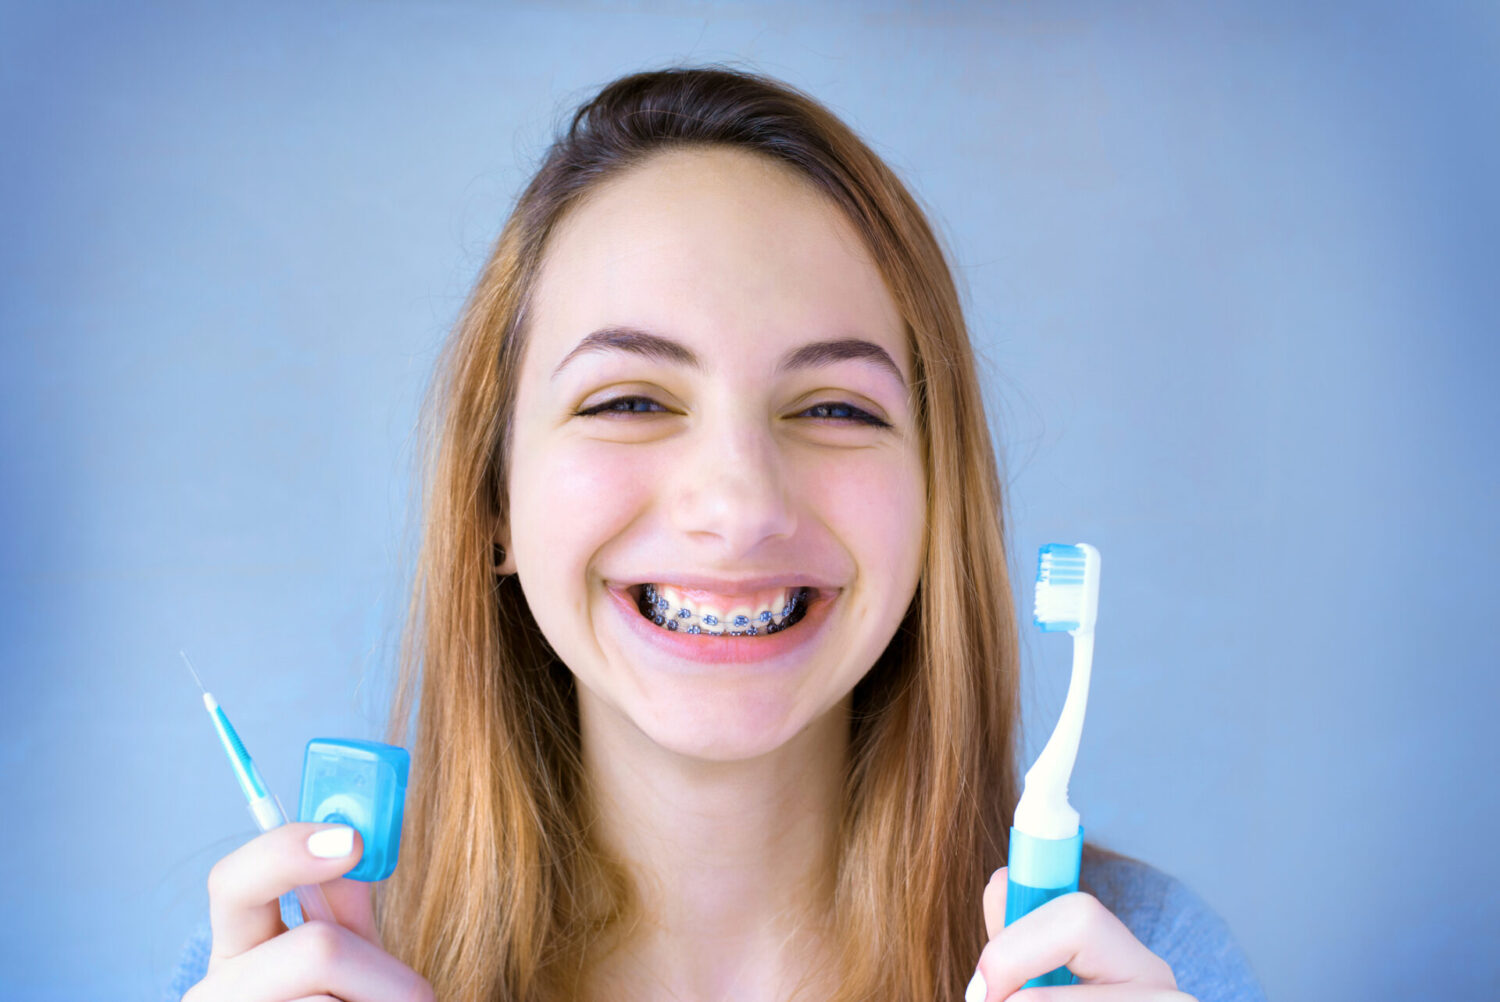 Blonde girl smiles with braces while holding a toothbrush, a floss container, and an interdental brush